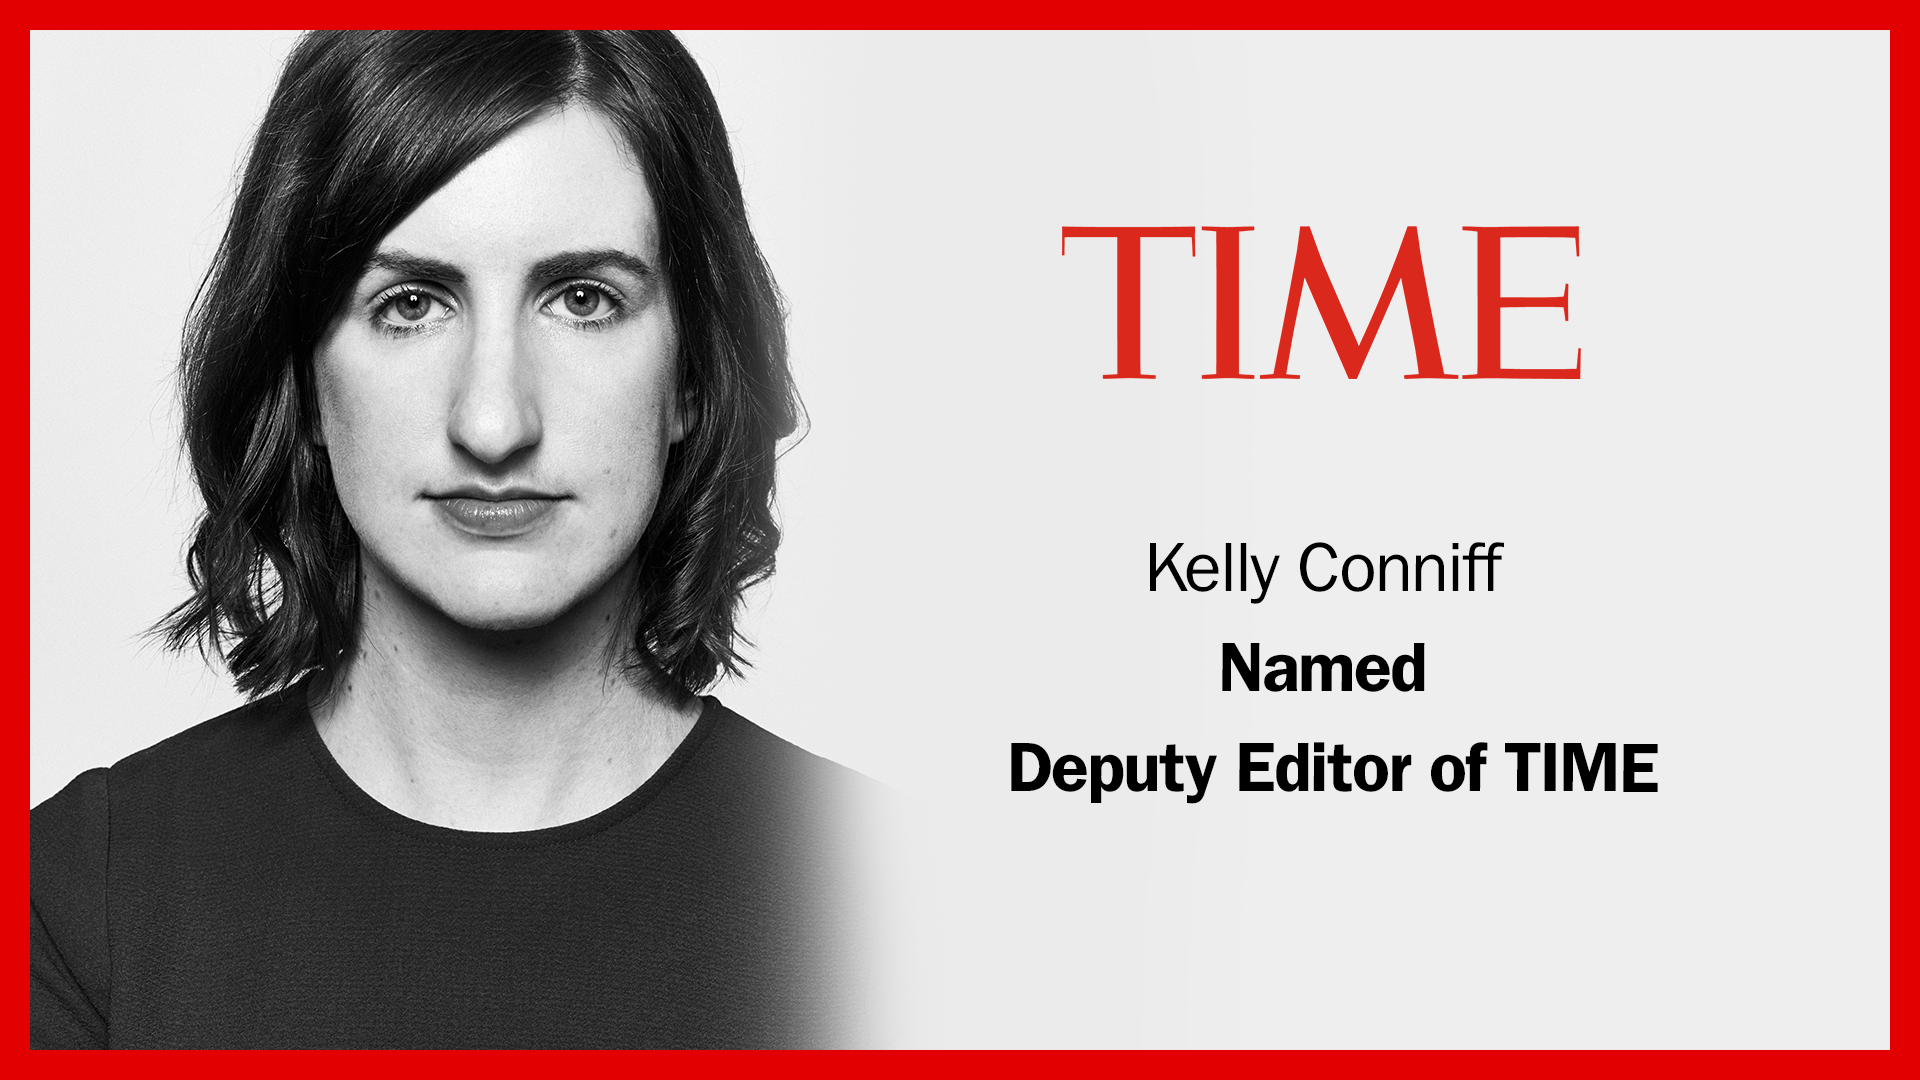 TIME Appoints Kelly Conniff as Deputy Editor